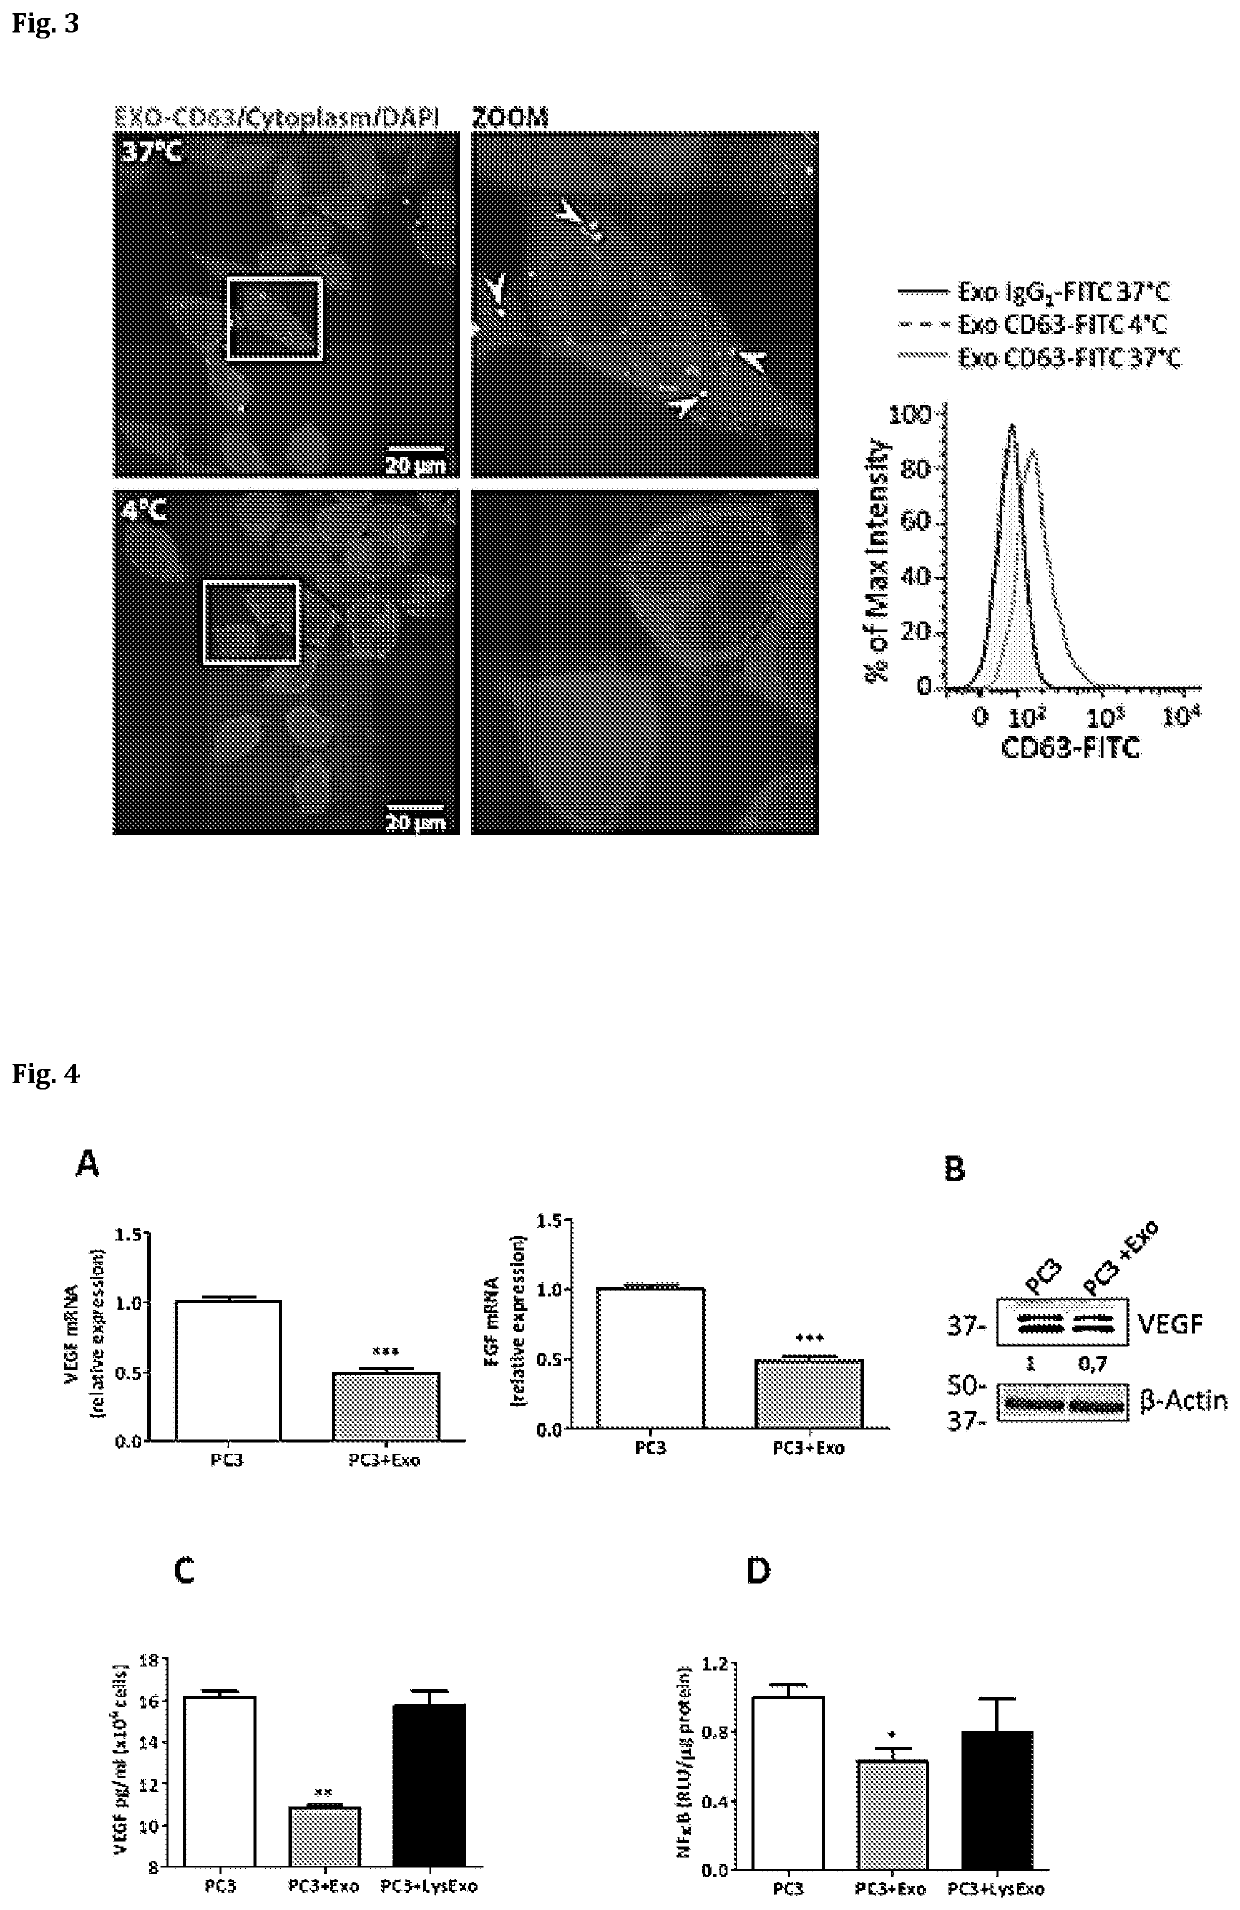 Anti-angiogenic therapy based on exosomes derived from menstrual stem cells